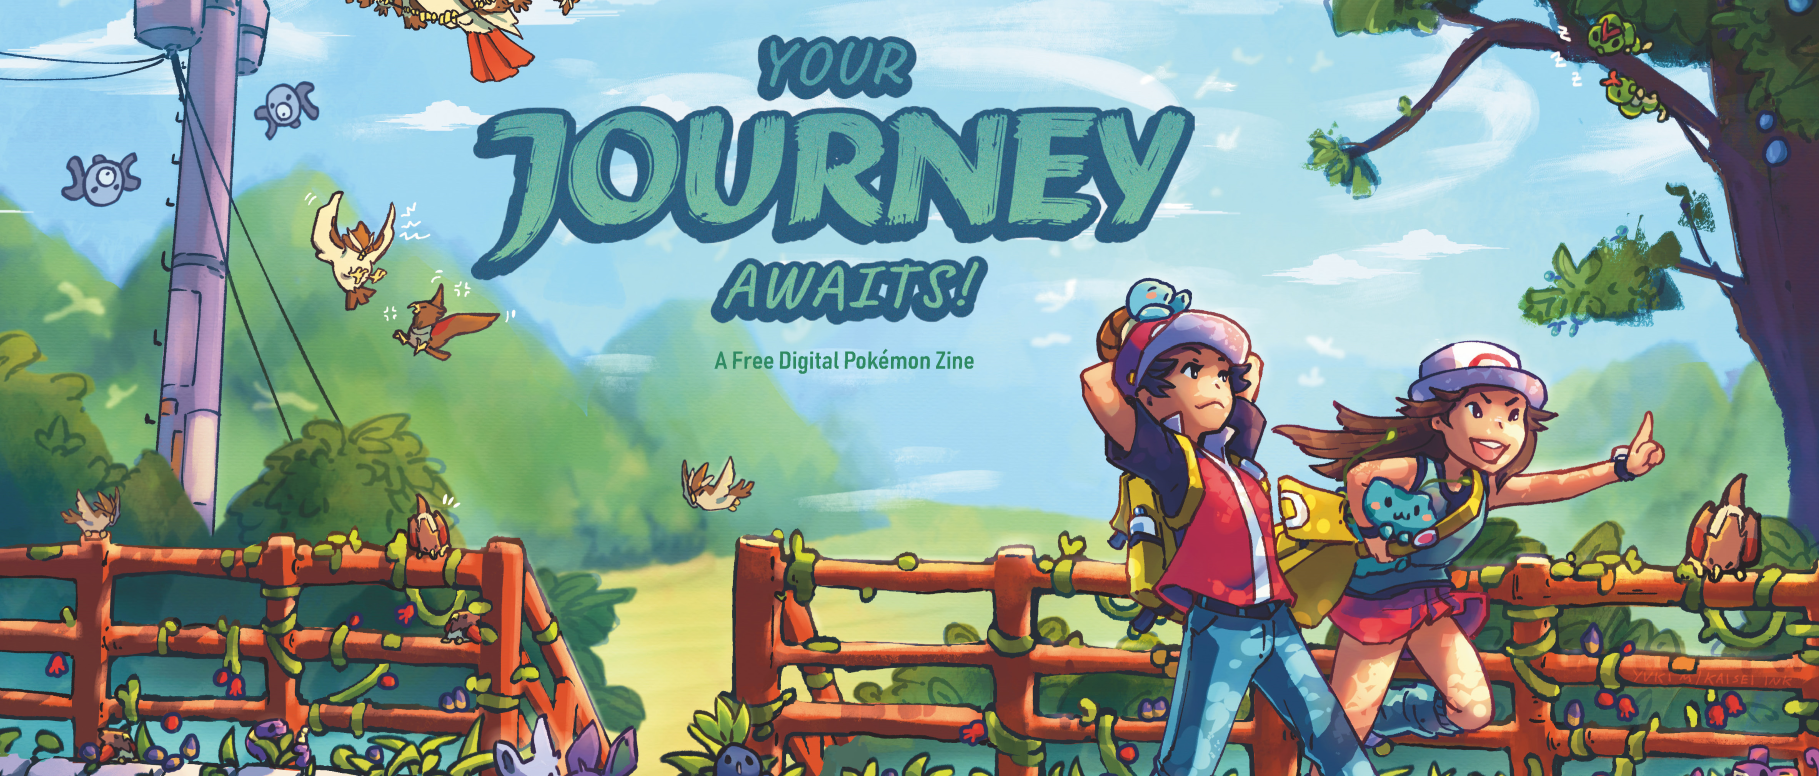 Your Journey Awaits!